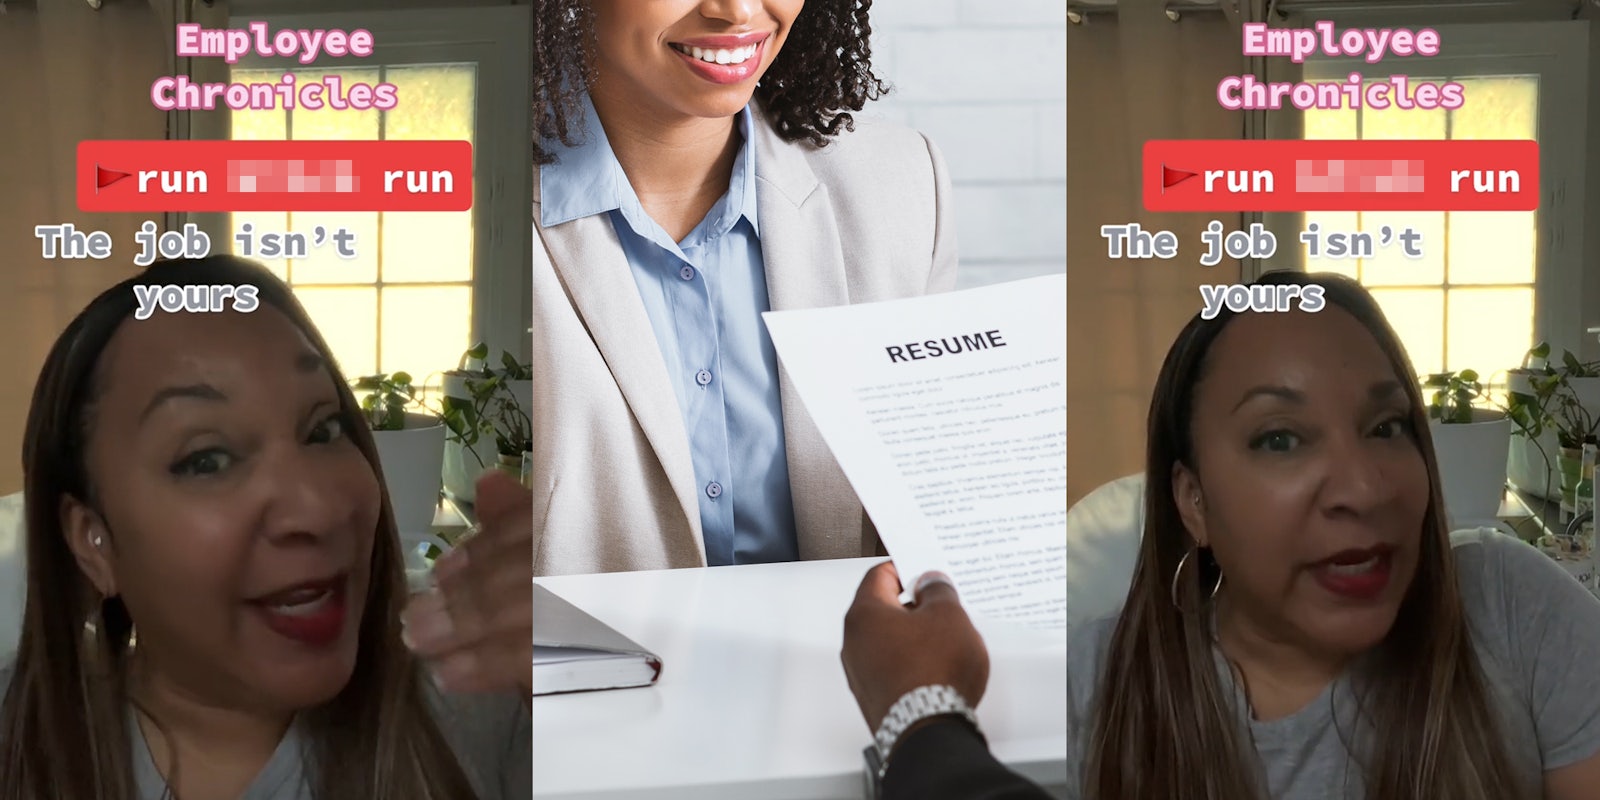 woman speaking with caption 'Employee Chronicles run blank run The job isn't yours' (l) woman at job interview as manager holds and reads resume (c) woman speaking with caption 'Employee Chronicles run blank run The job isn't yours' (r)